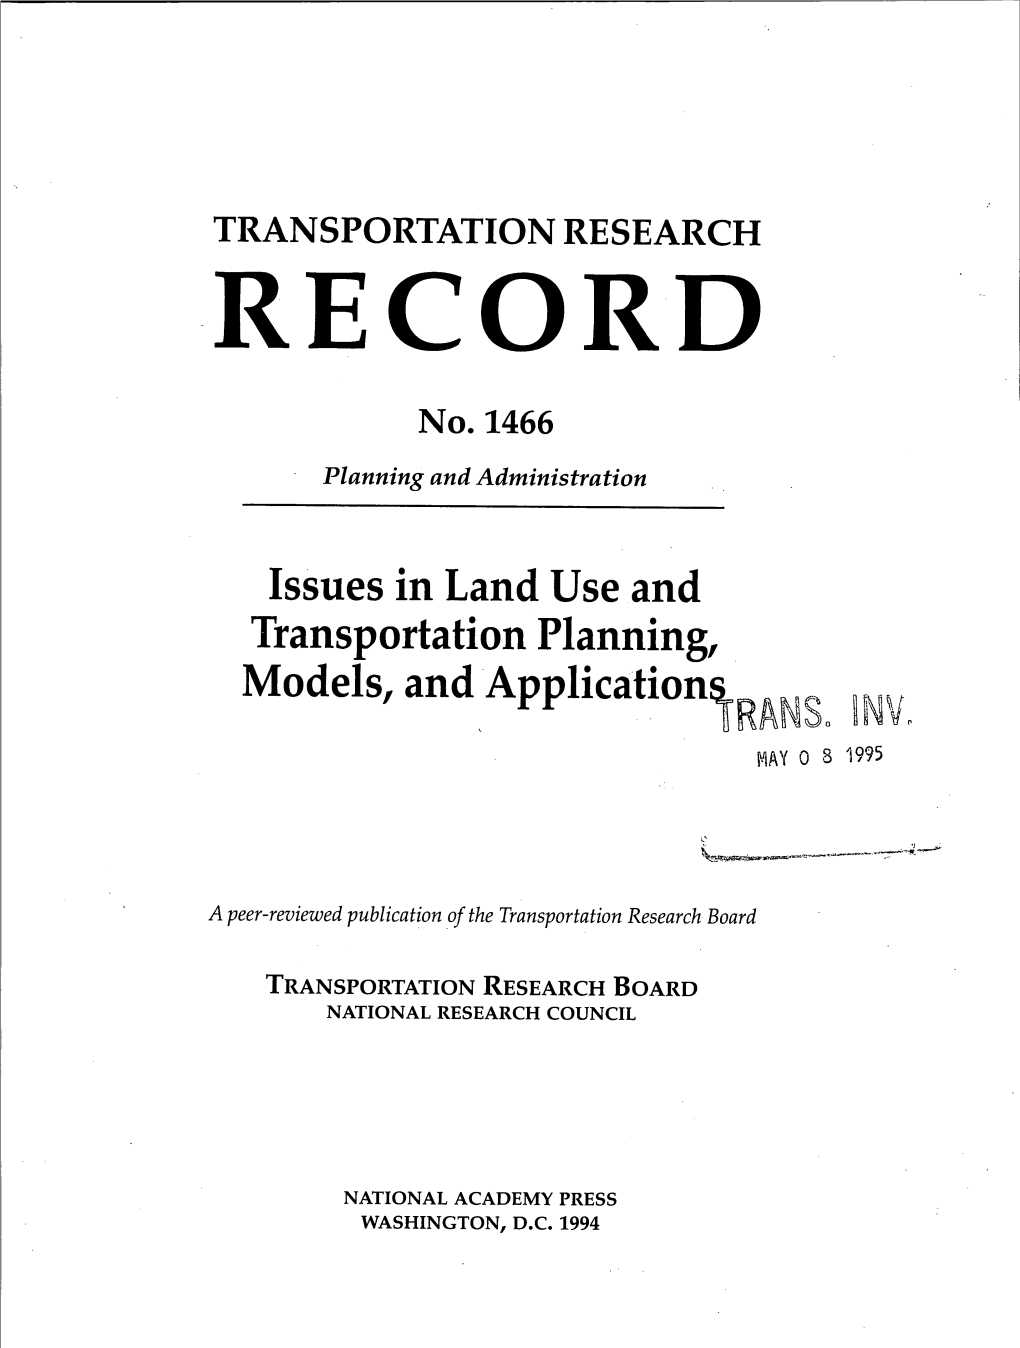 Transportation Research Record No. 1466, Issues in Land Use And